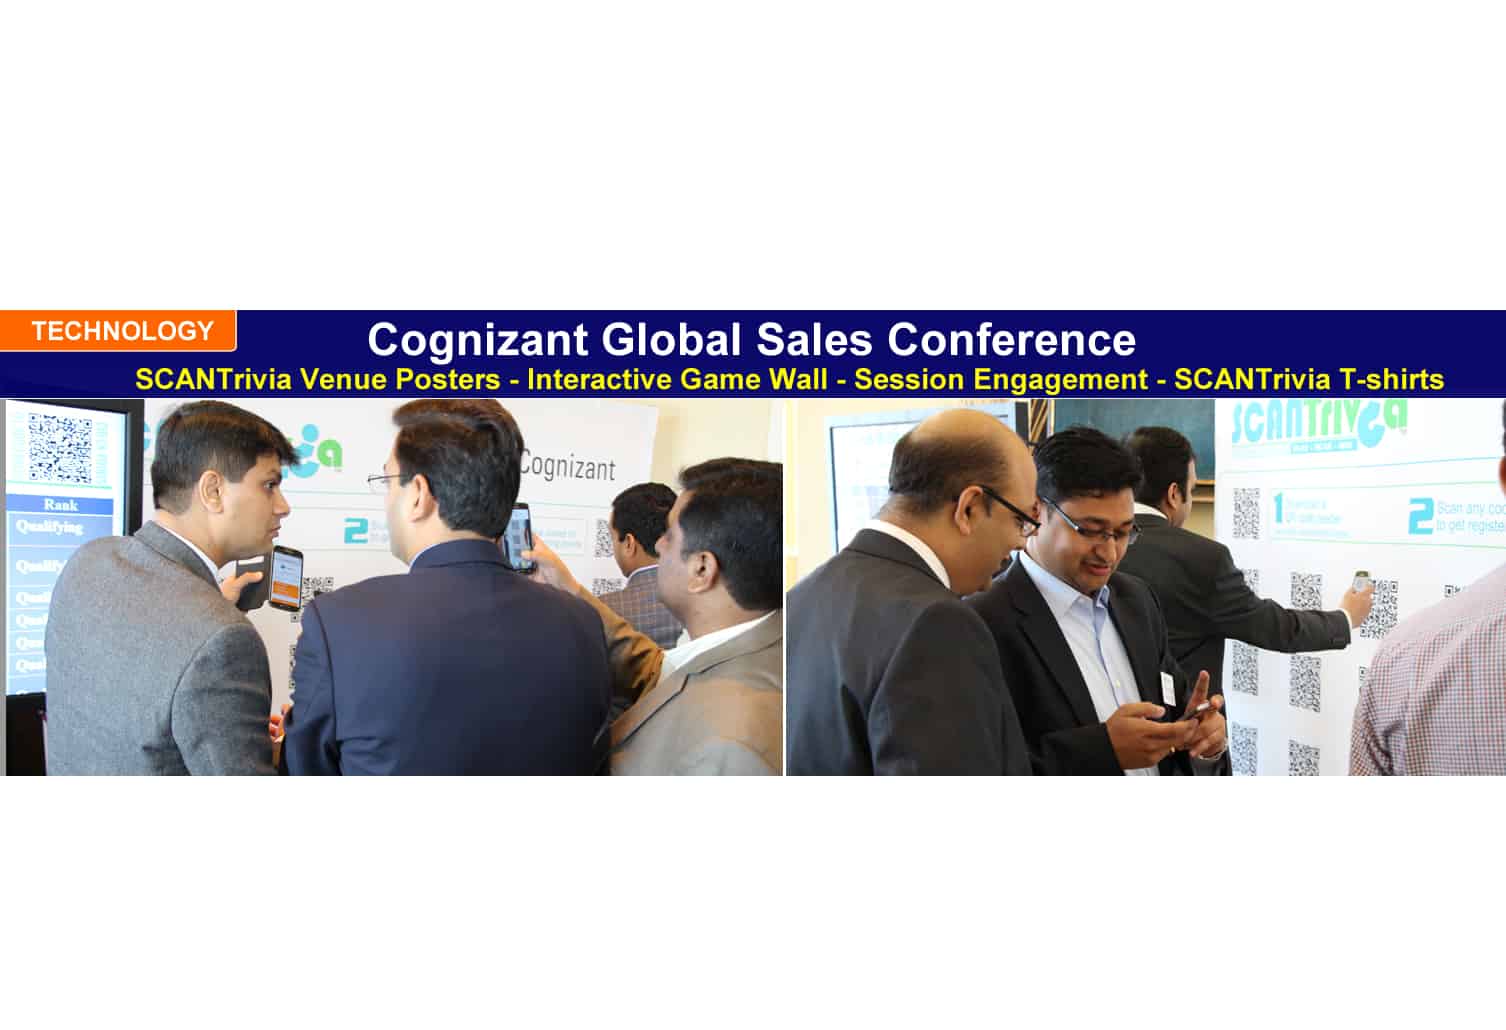 Cognizant Global Sales Meeting Virtual Conference Gamification